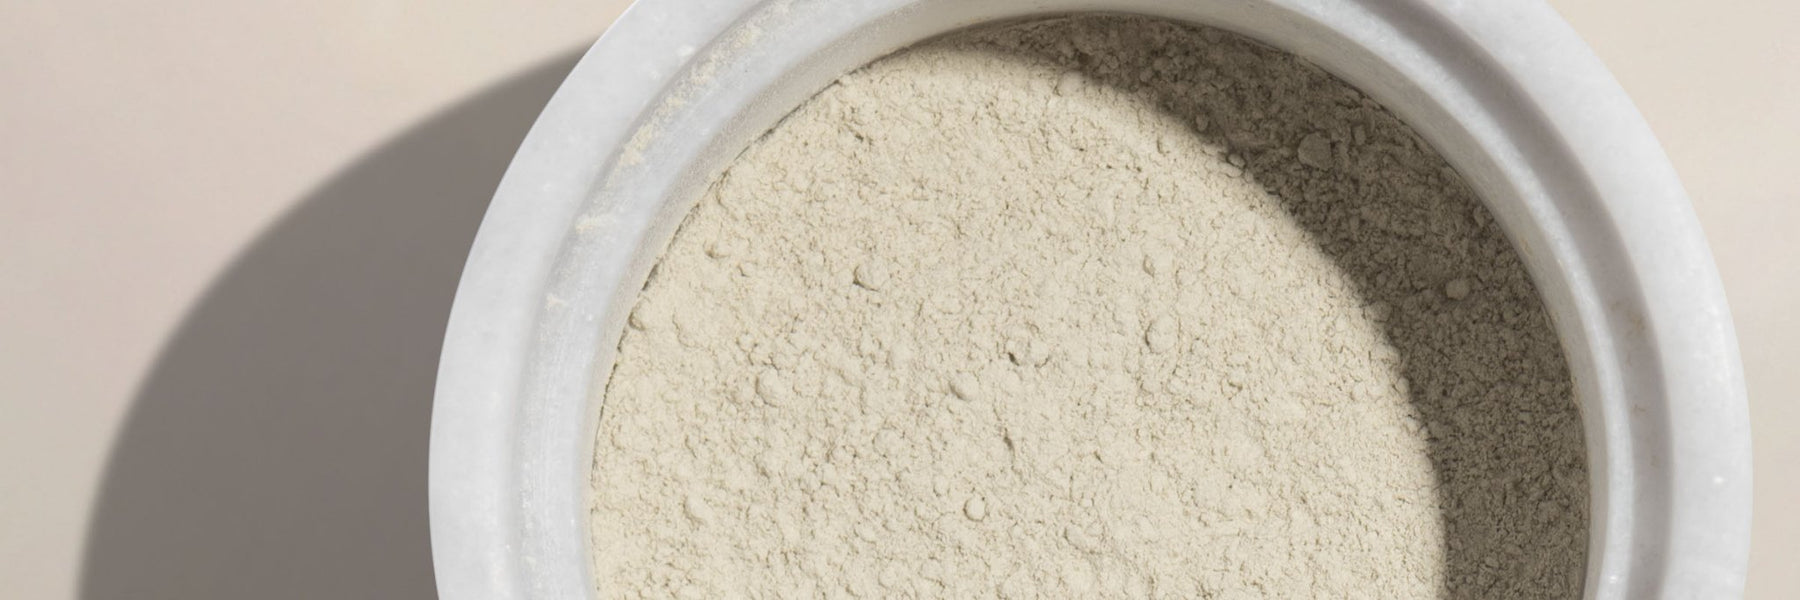 Bentonite Clay for Skin: Benefits, How to Use